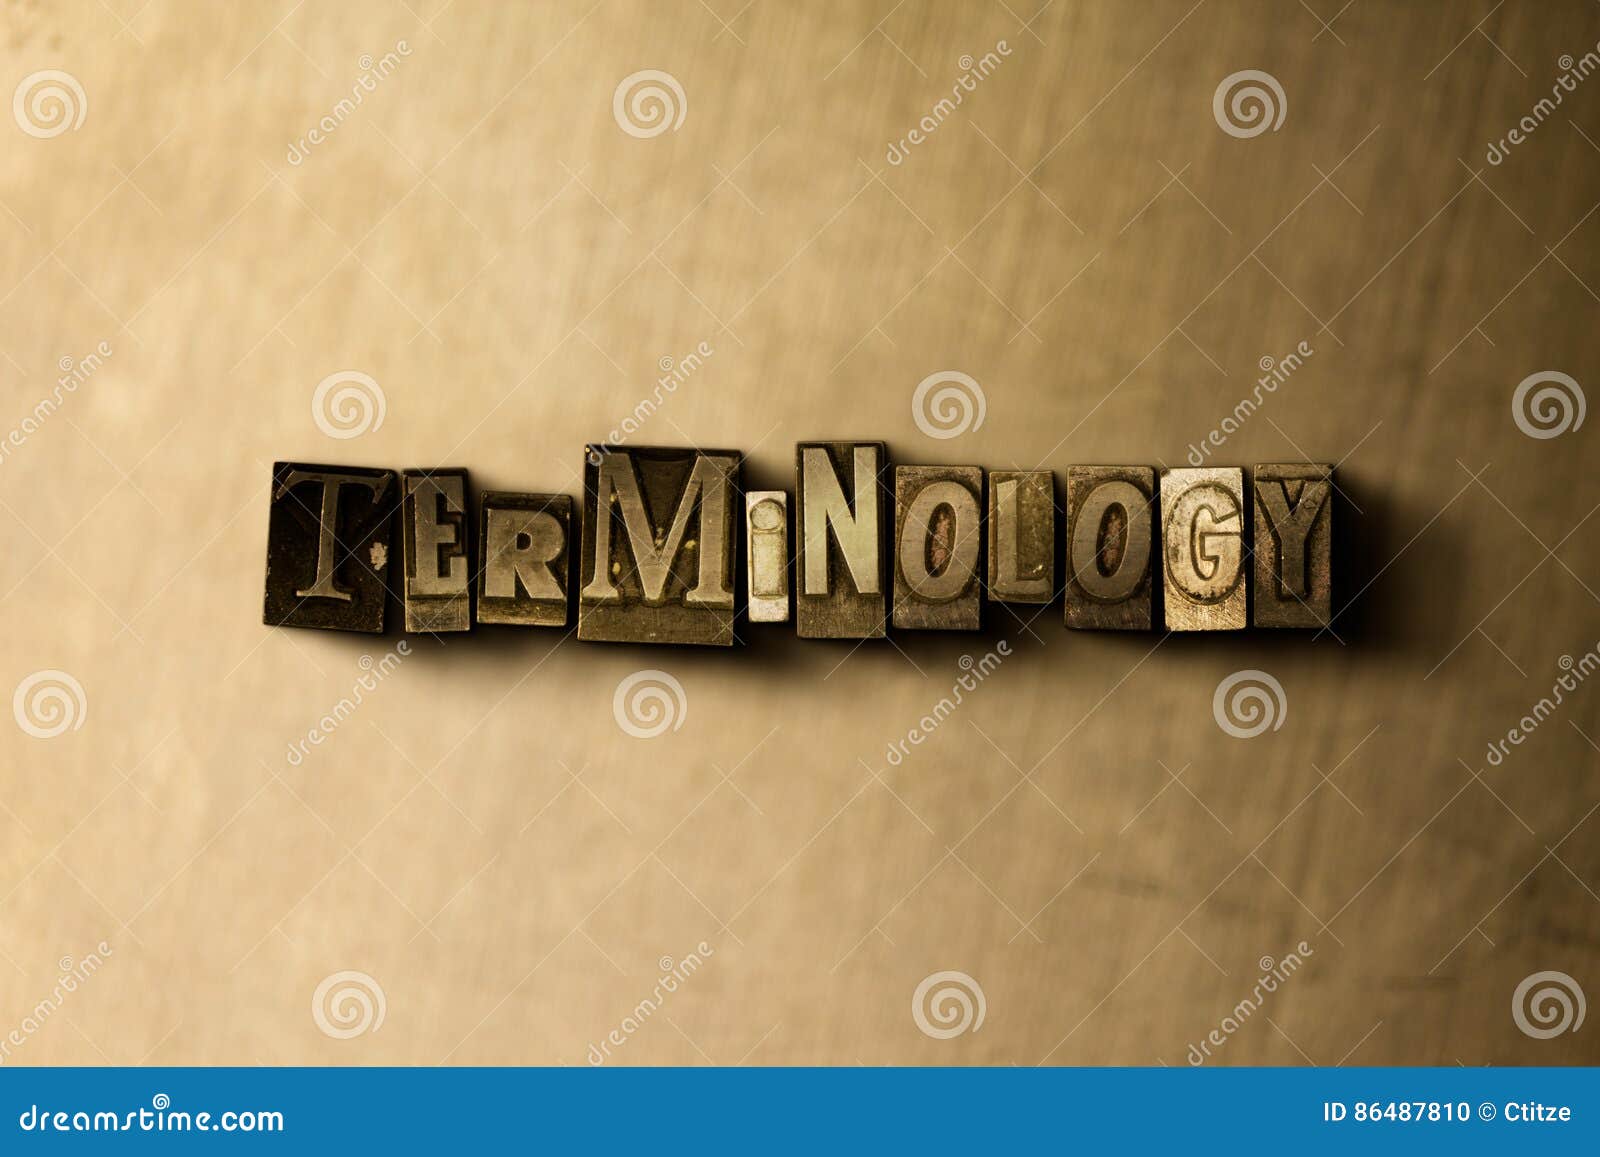 terminology - close-up of grungy vintage typeset word on metal backdrop